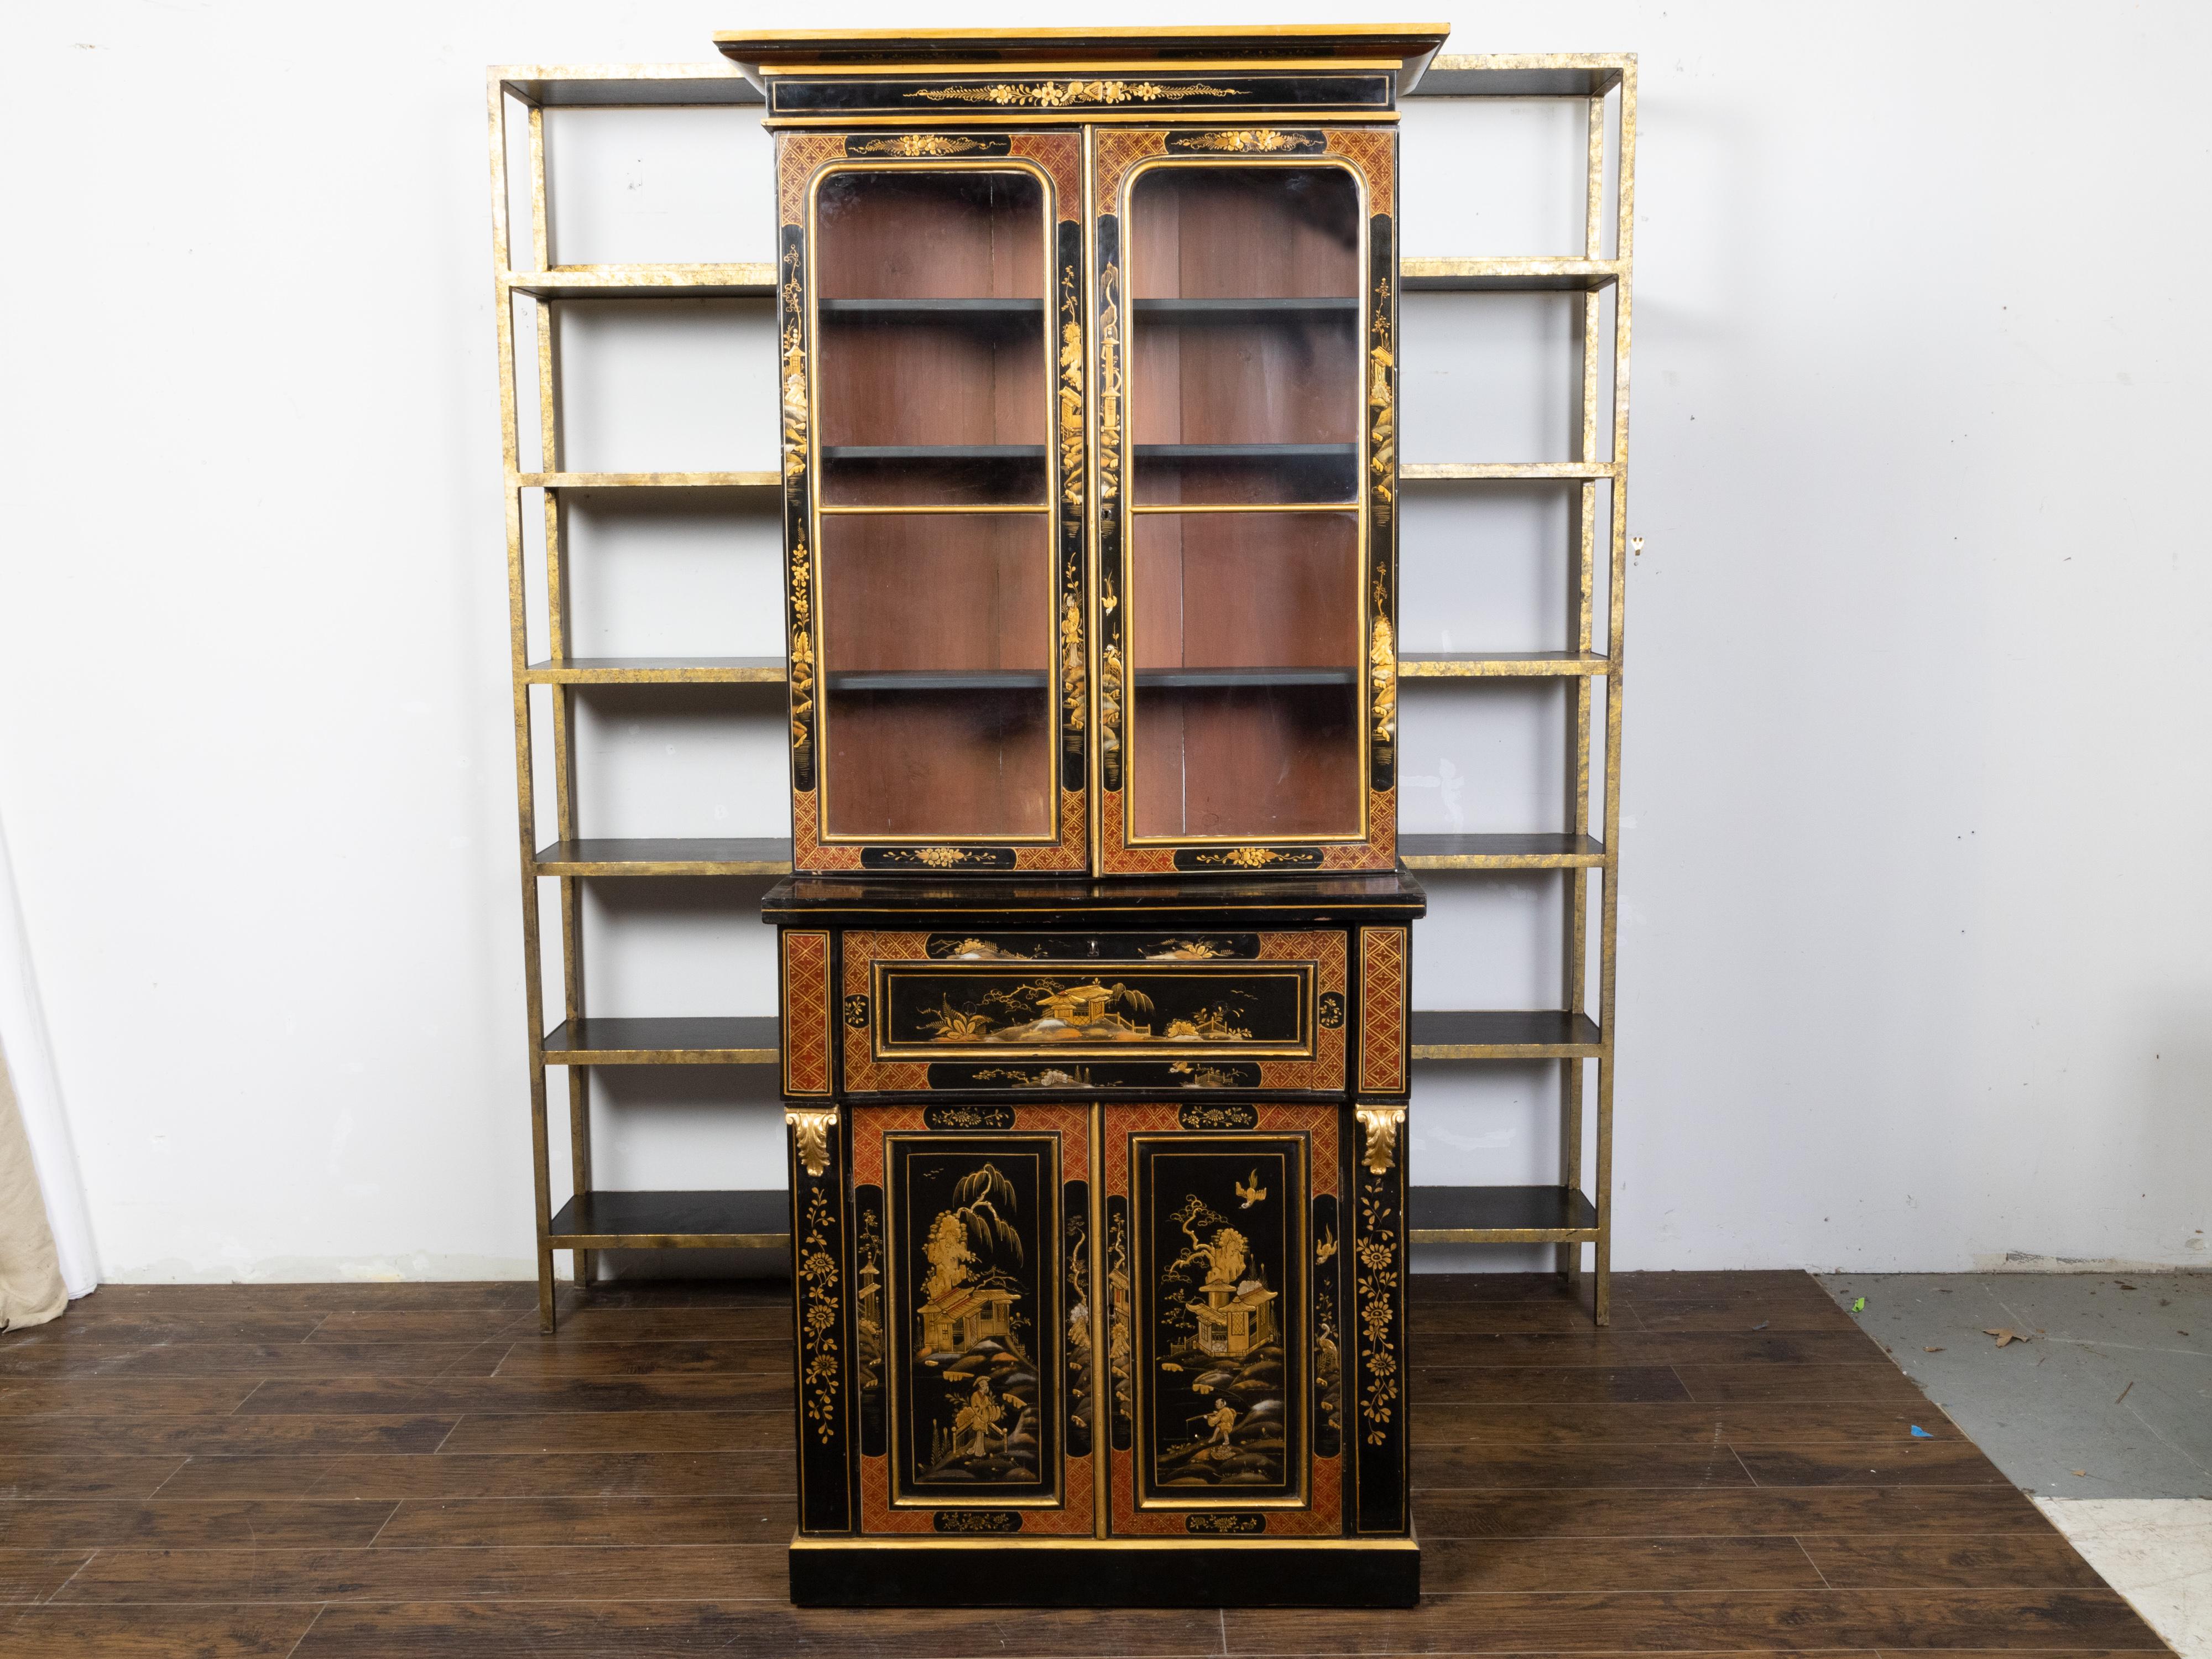 An English black lacquer secretary bookcase from the 19th century, with glass doors, drop-front desk and gold Chinoiserie décor. Created in England during the 19th century, this secretary bookcase draws our immediate attention with its black